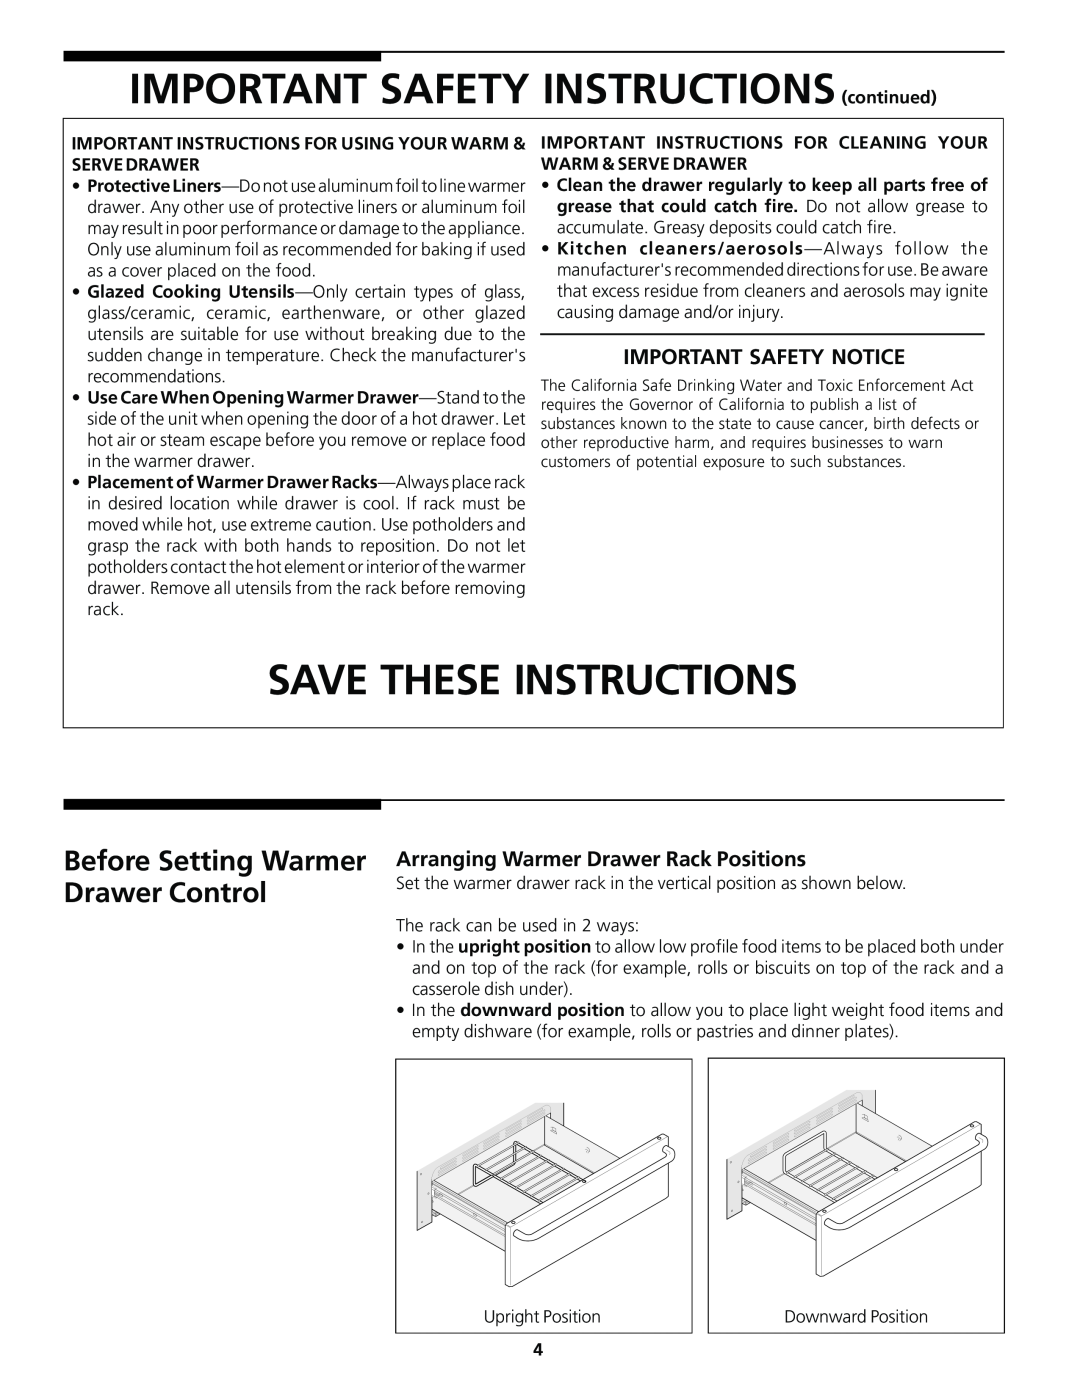 Frigidaire Warm & Serve Drawer IMPORTANT SAFETY INSTRUCTIONS continued, Save These Instructions, Important Safety Notice 